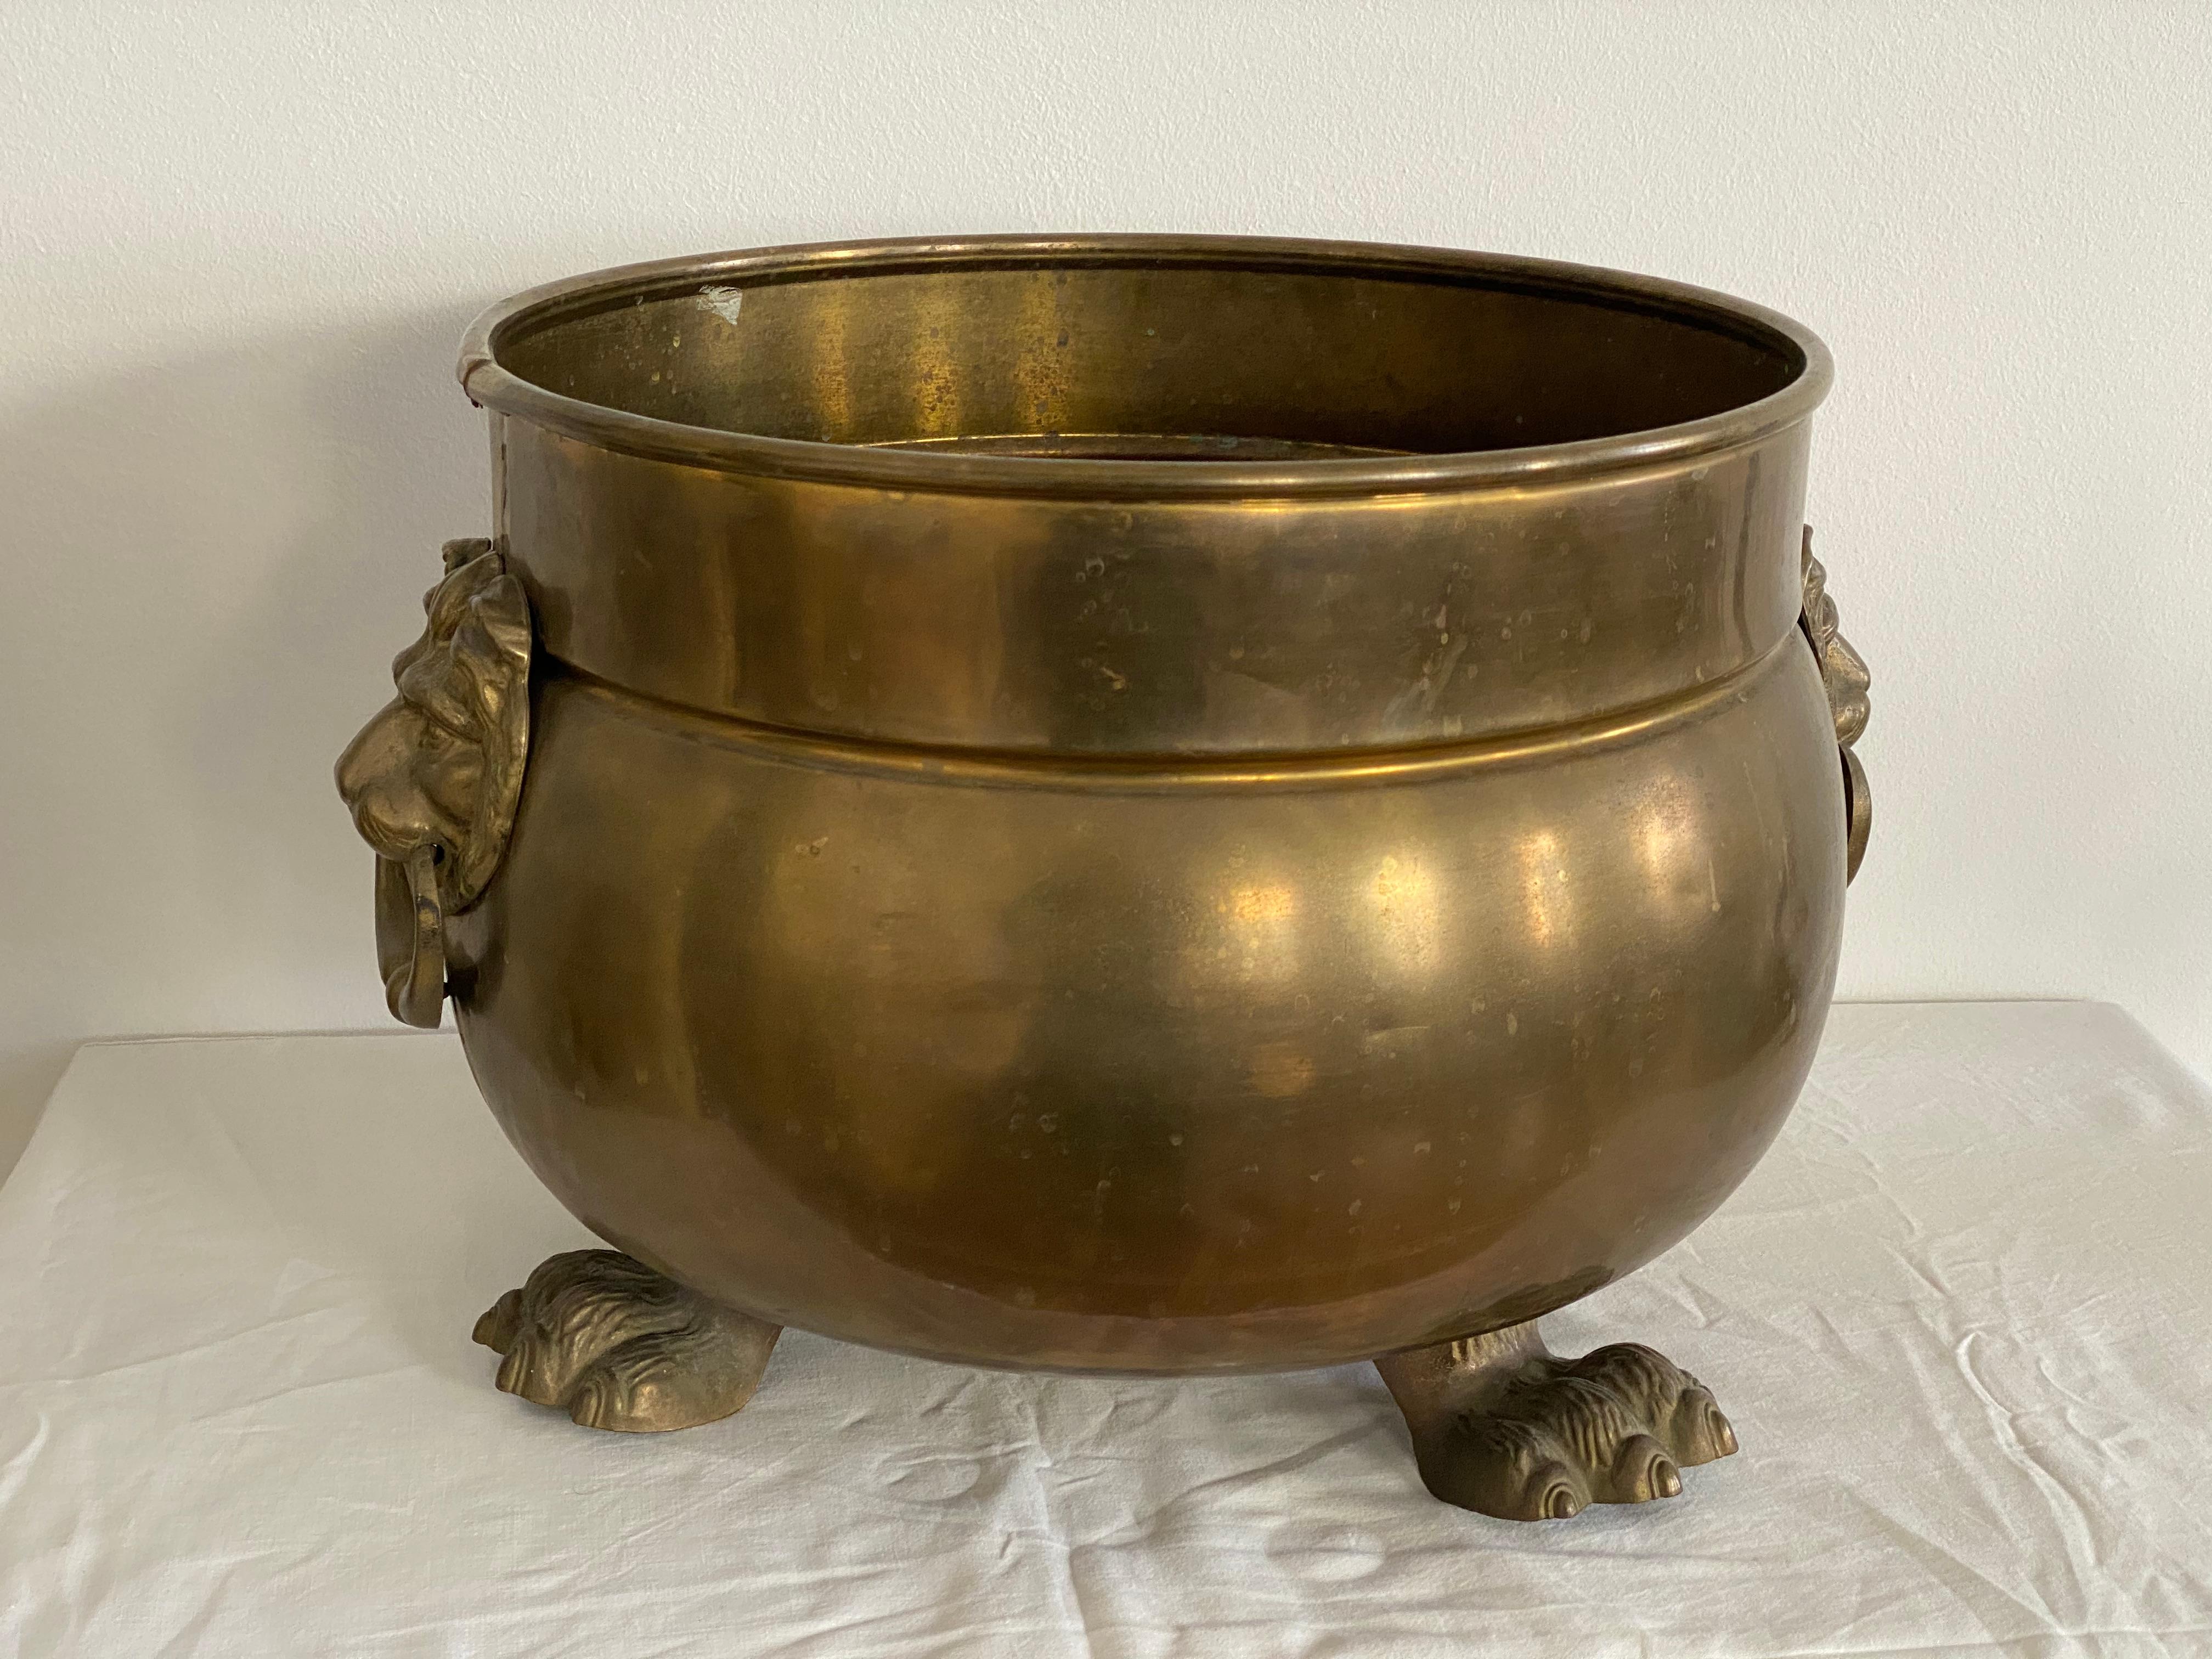 Rounded copper planter features 3 brass feet and 2 brass lions heads with rings on
each end. Made in Austria in the early 1950s.